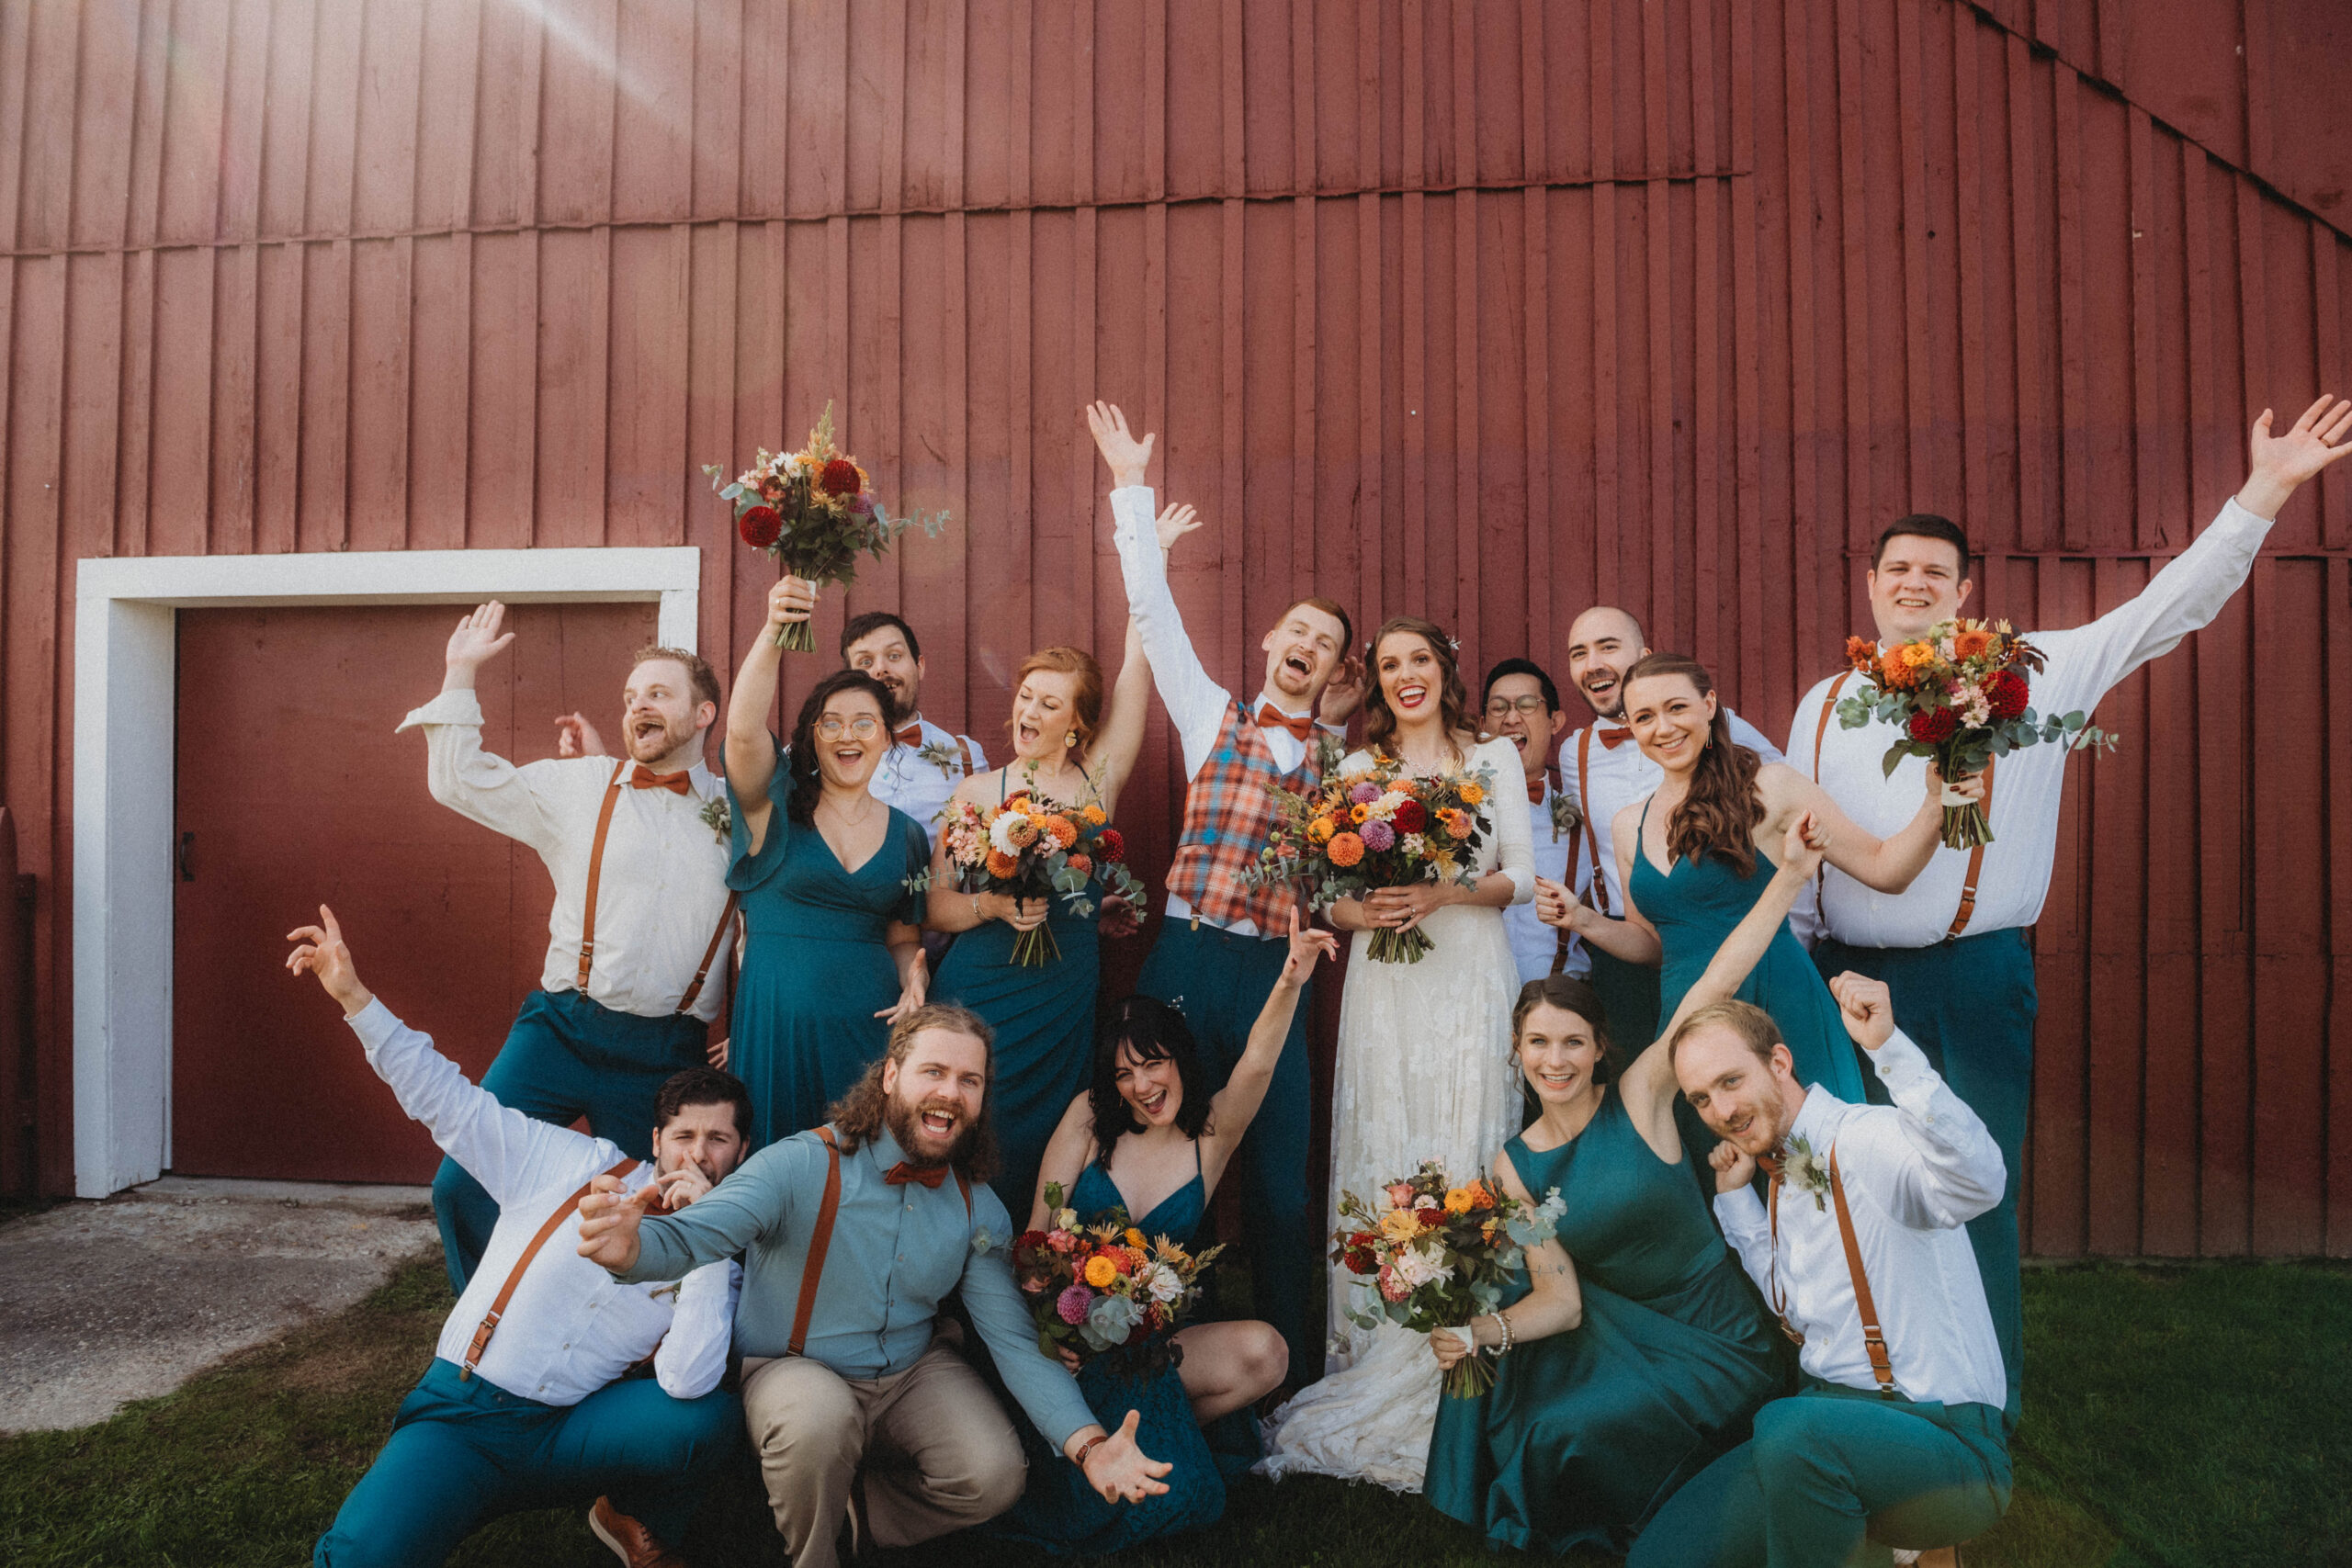 The wedding party standing and kneeling together for a group photo outside of the rustic wedding barn